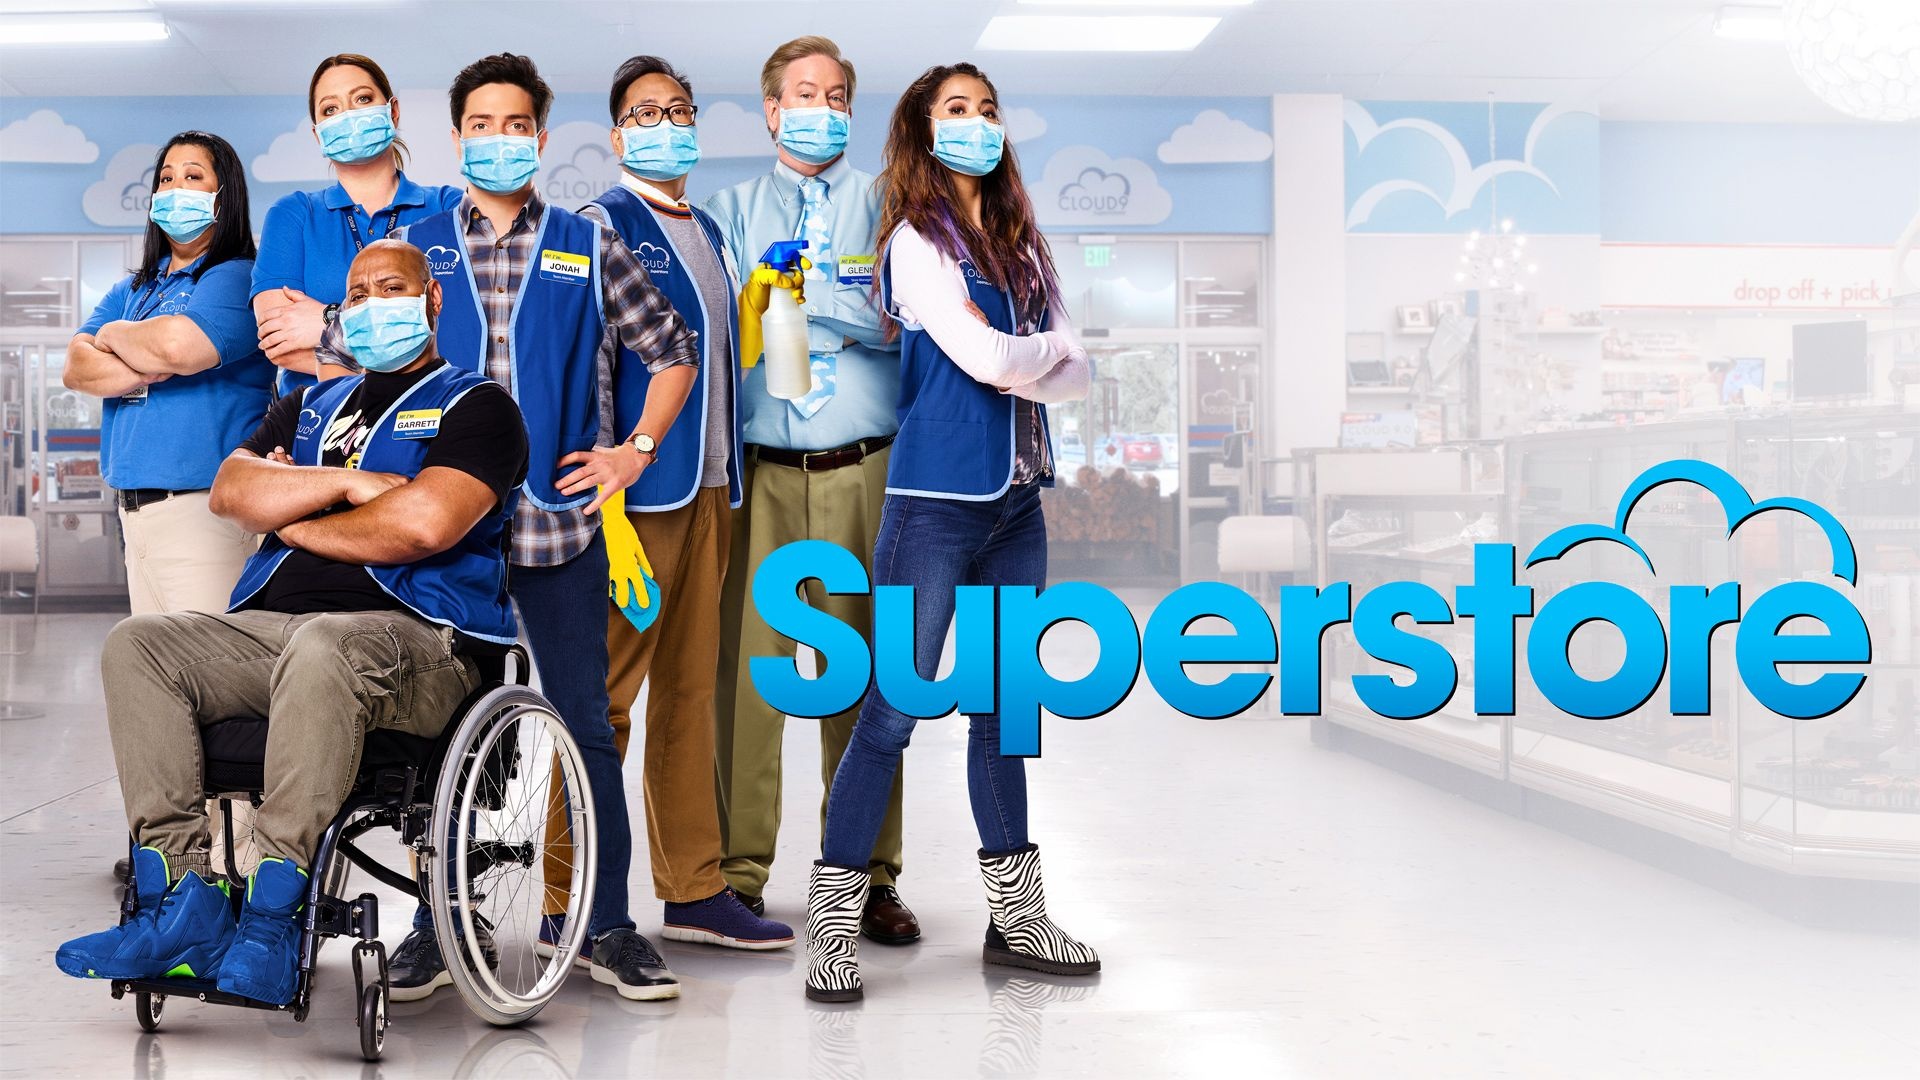 Superstore Wallpapers - Top Free Superstore Backgrounds 1920x1080